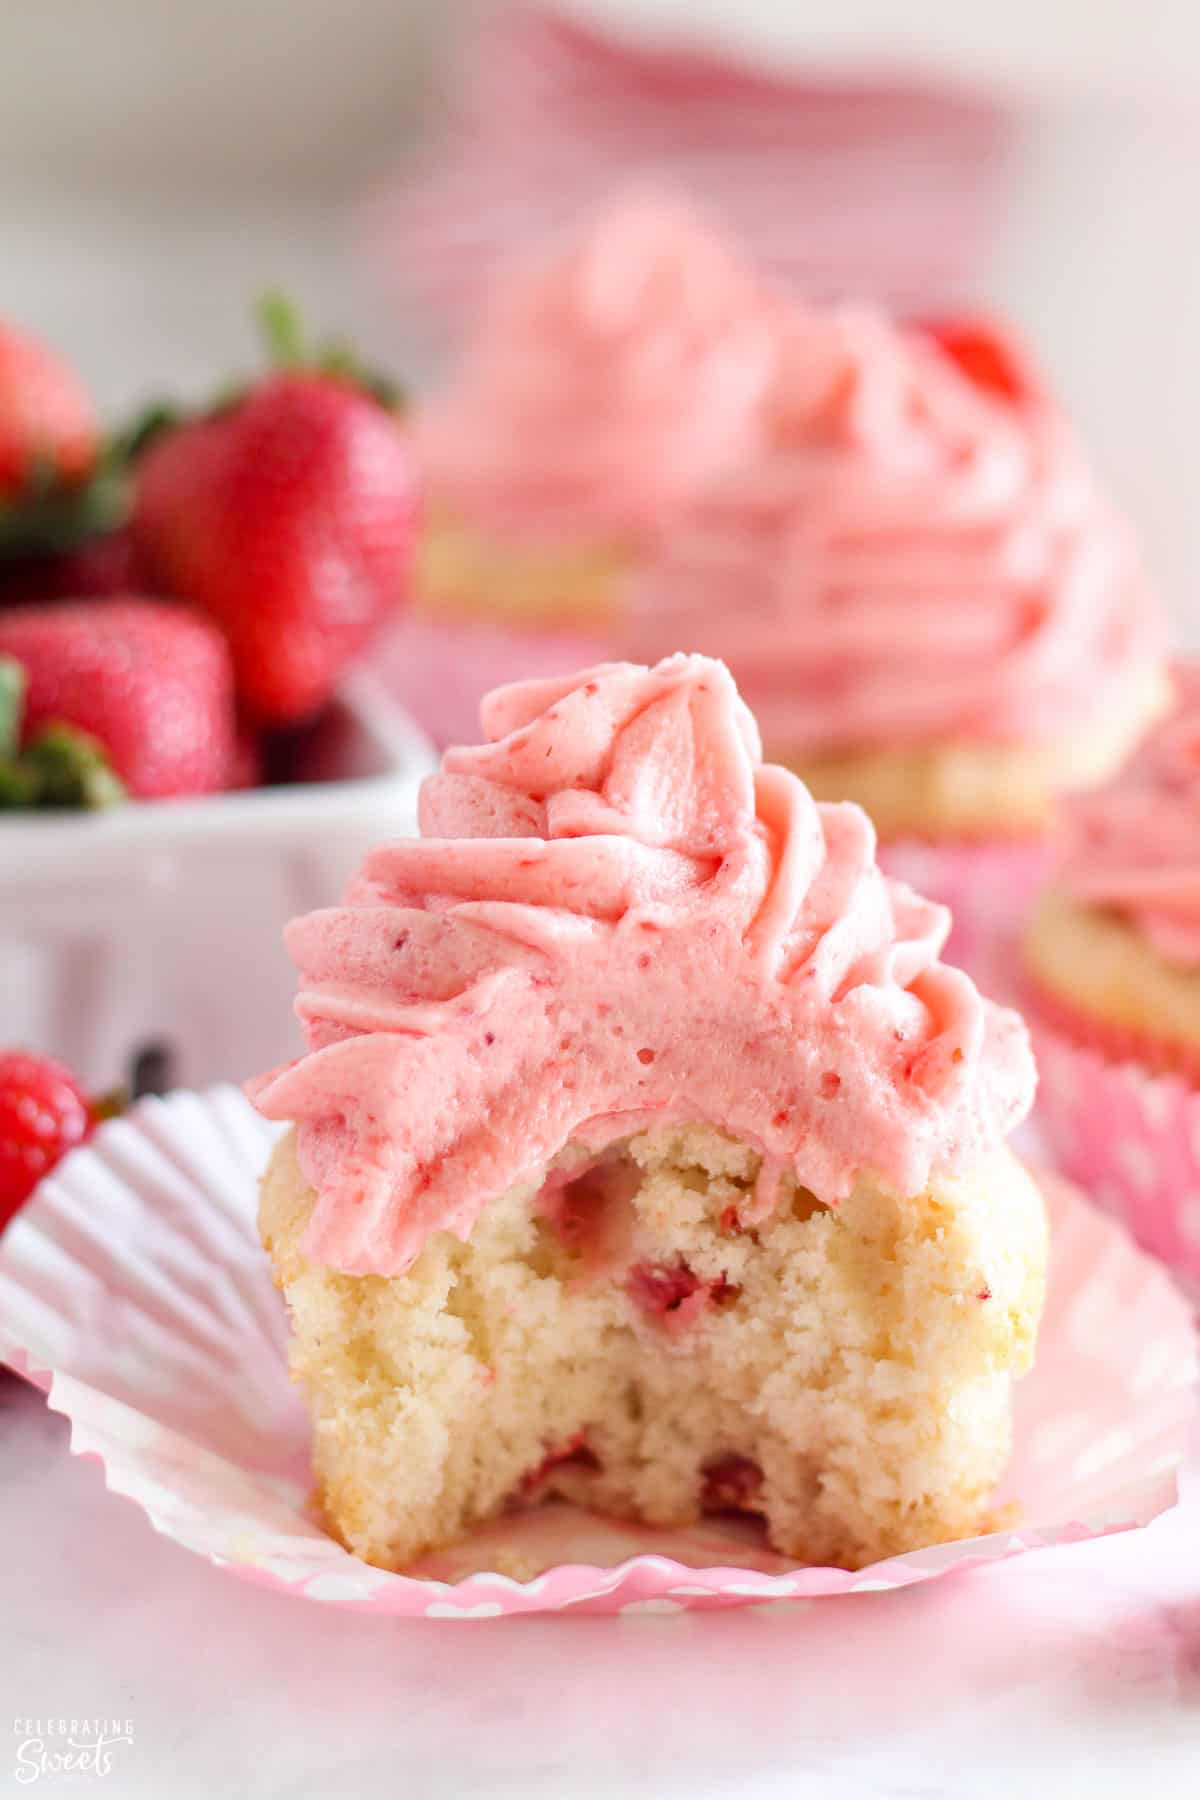 Strawberry cupcake with a bite taken out of it